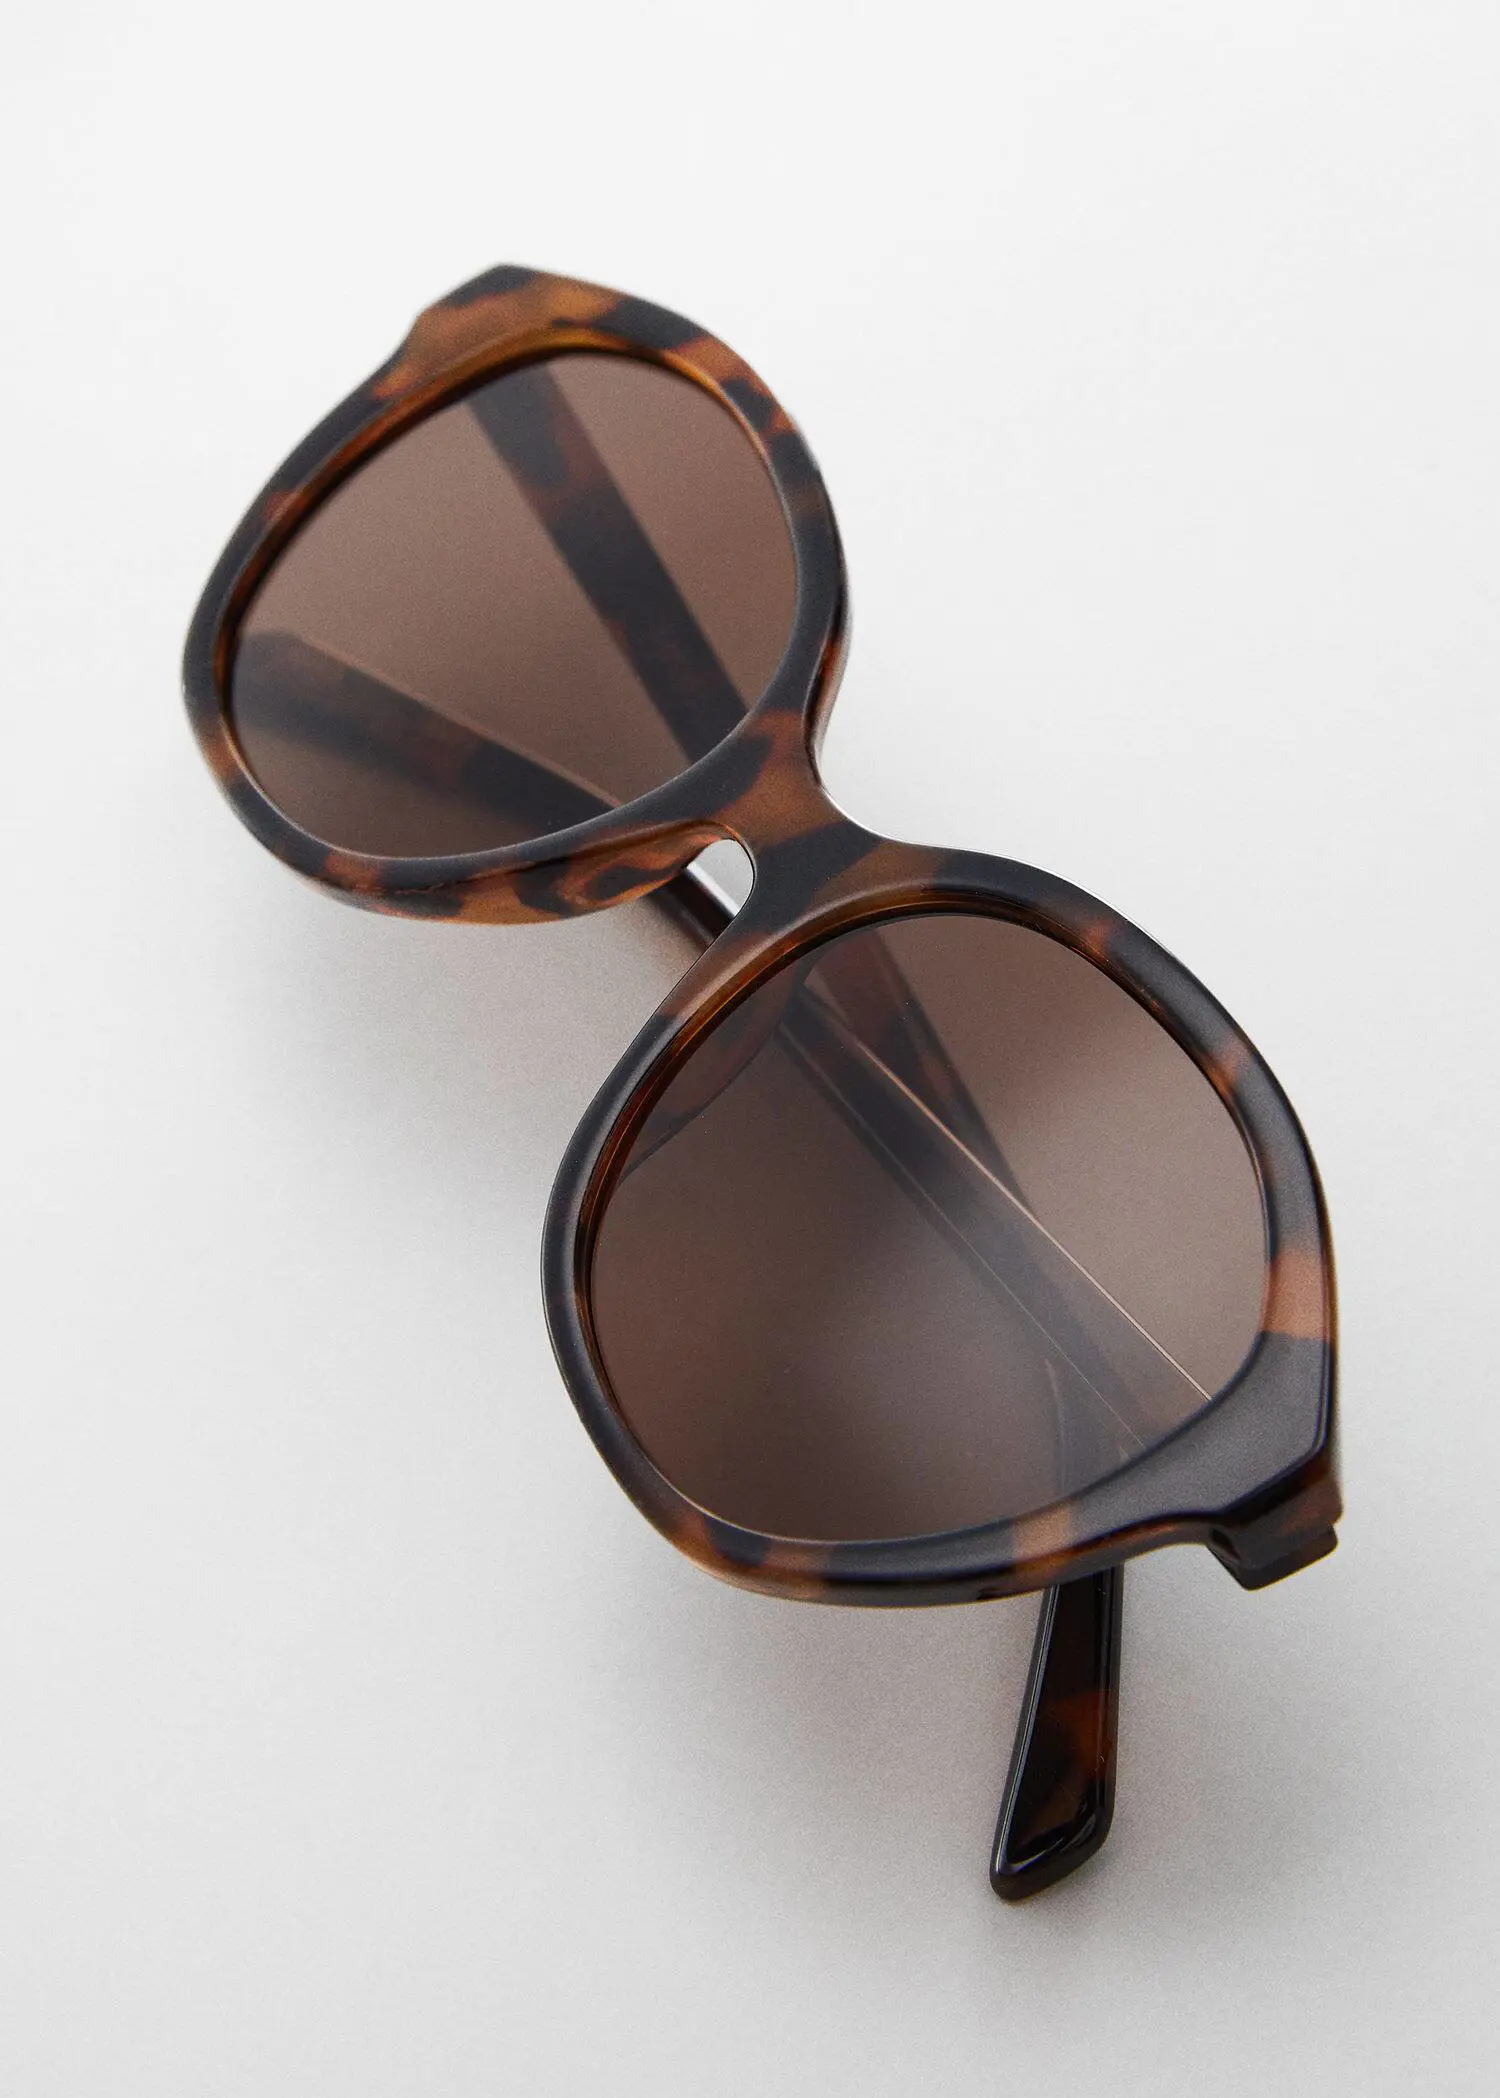 Mango Tortoiseshell rounded sunglasses. a close up of a pair of sun glasses 